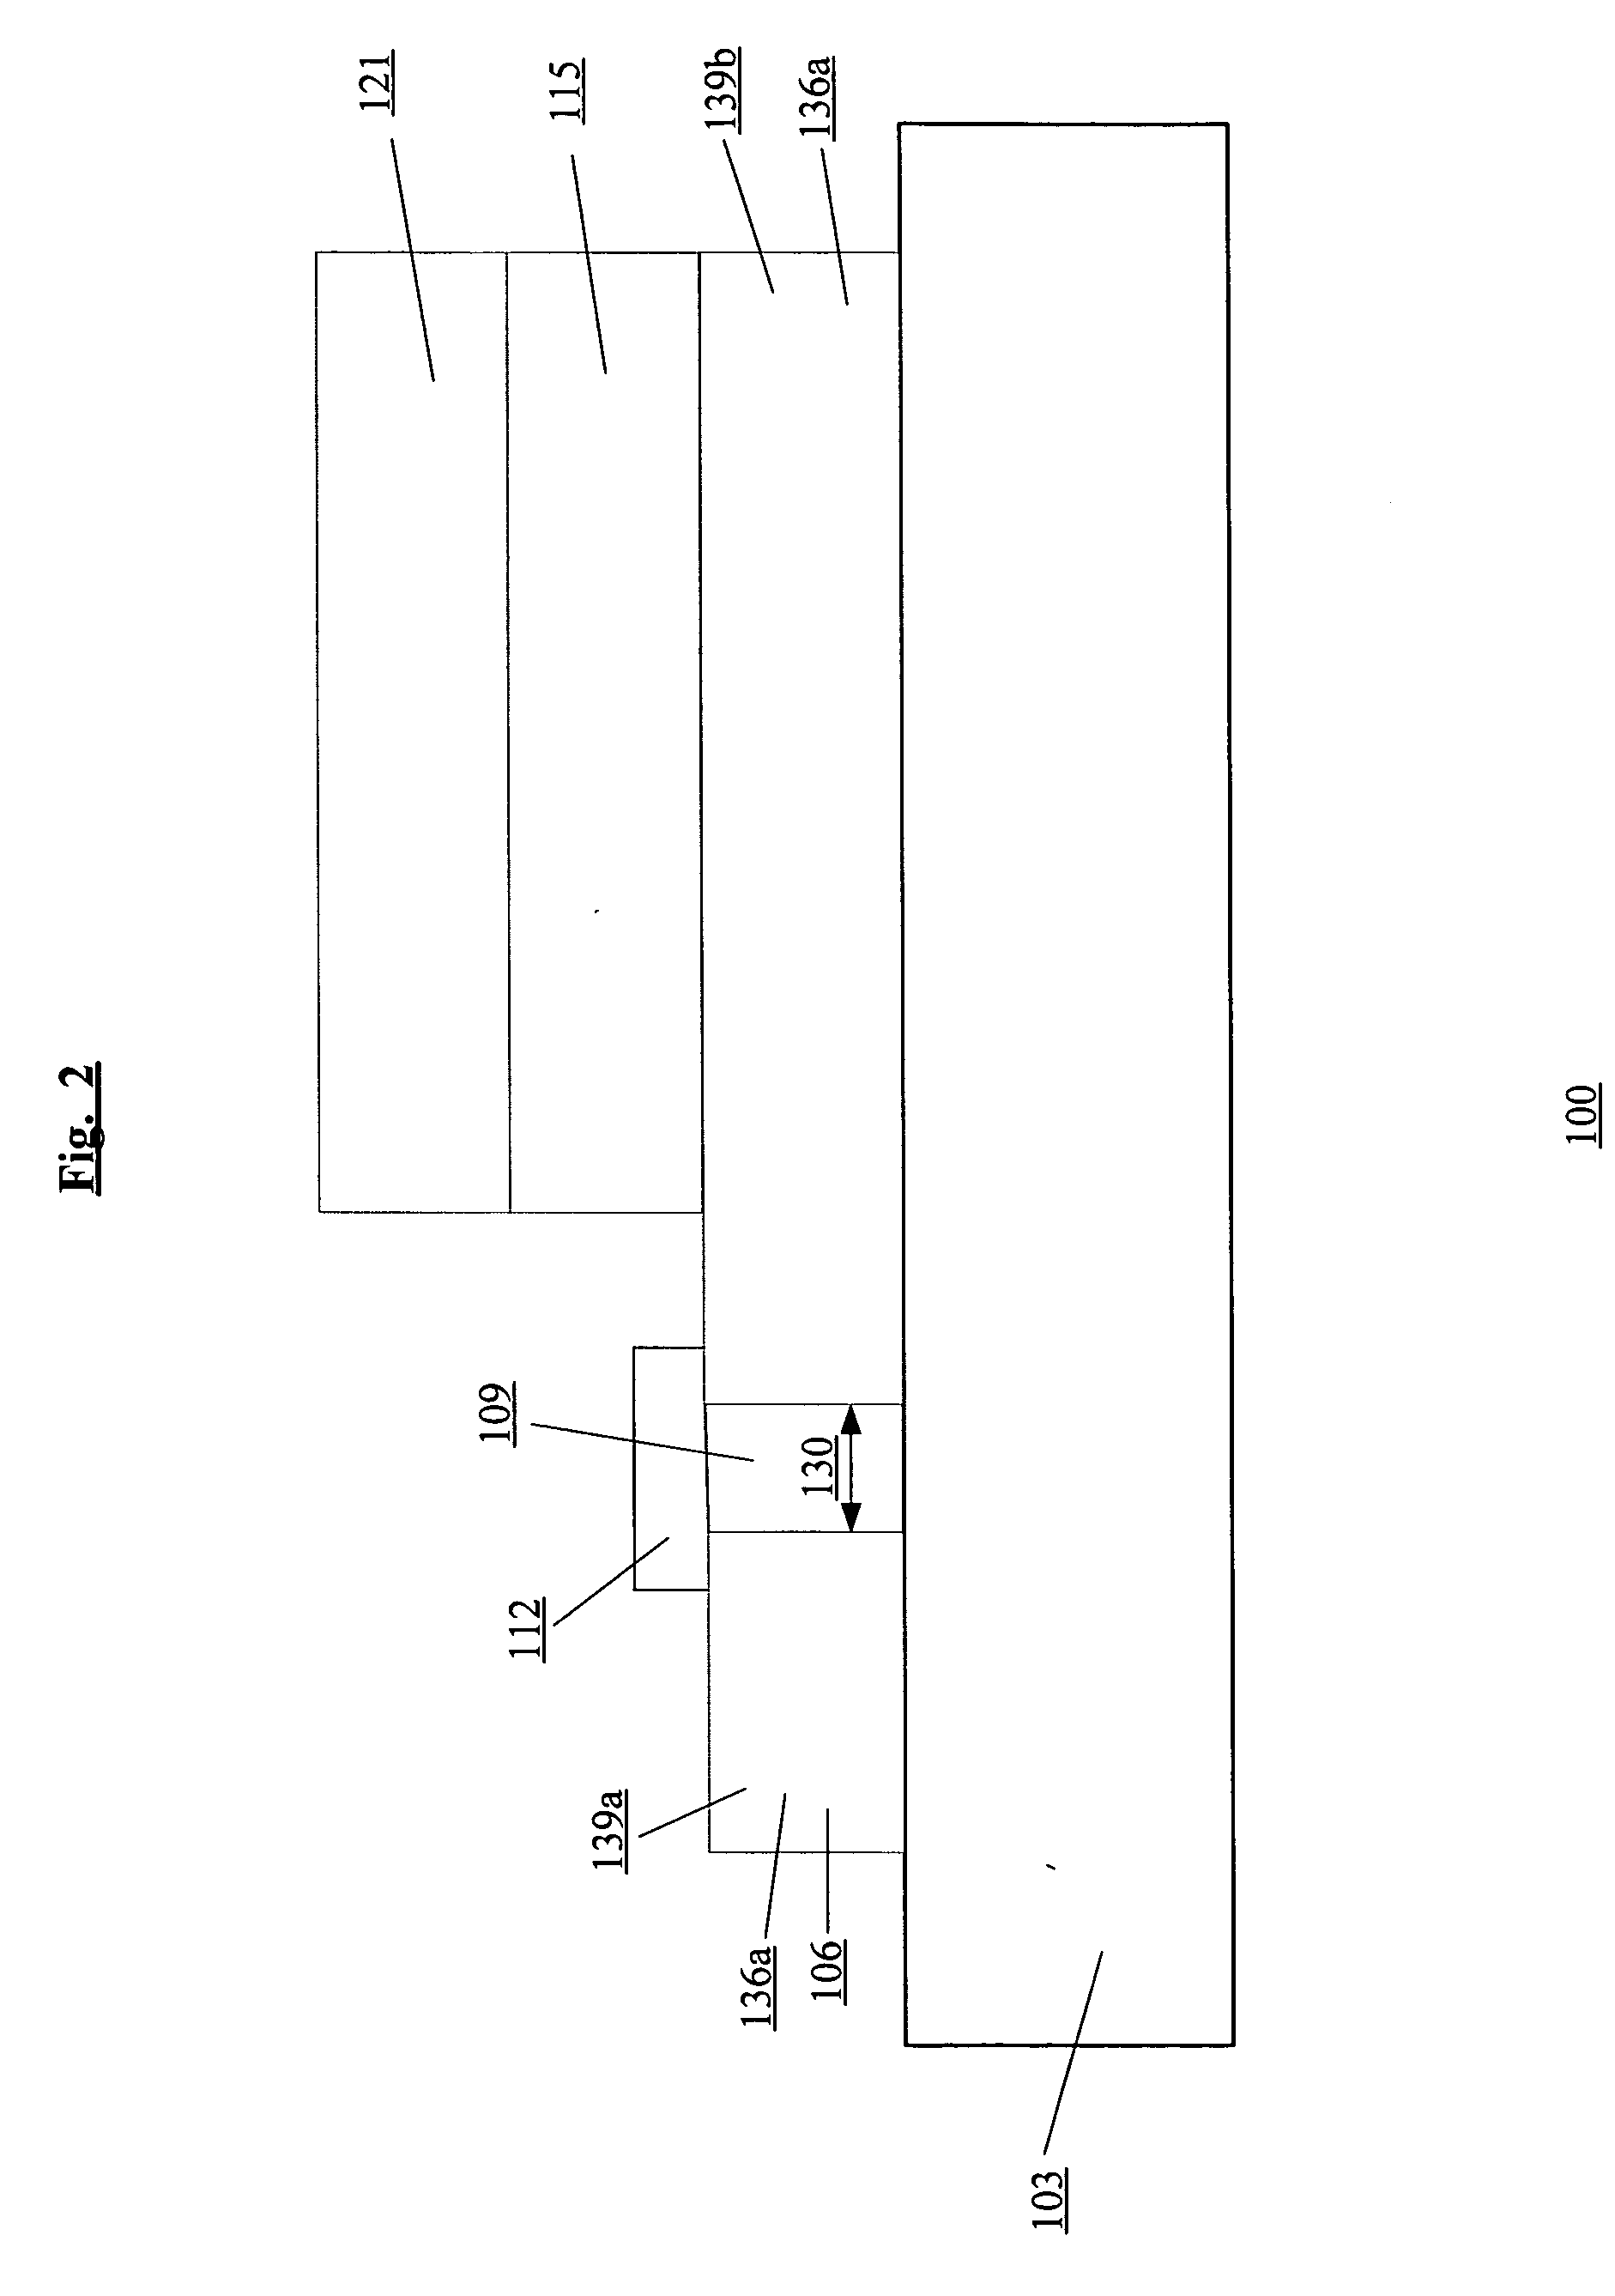 Integrated fuses for OLED lighting device